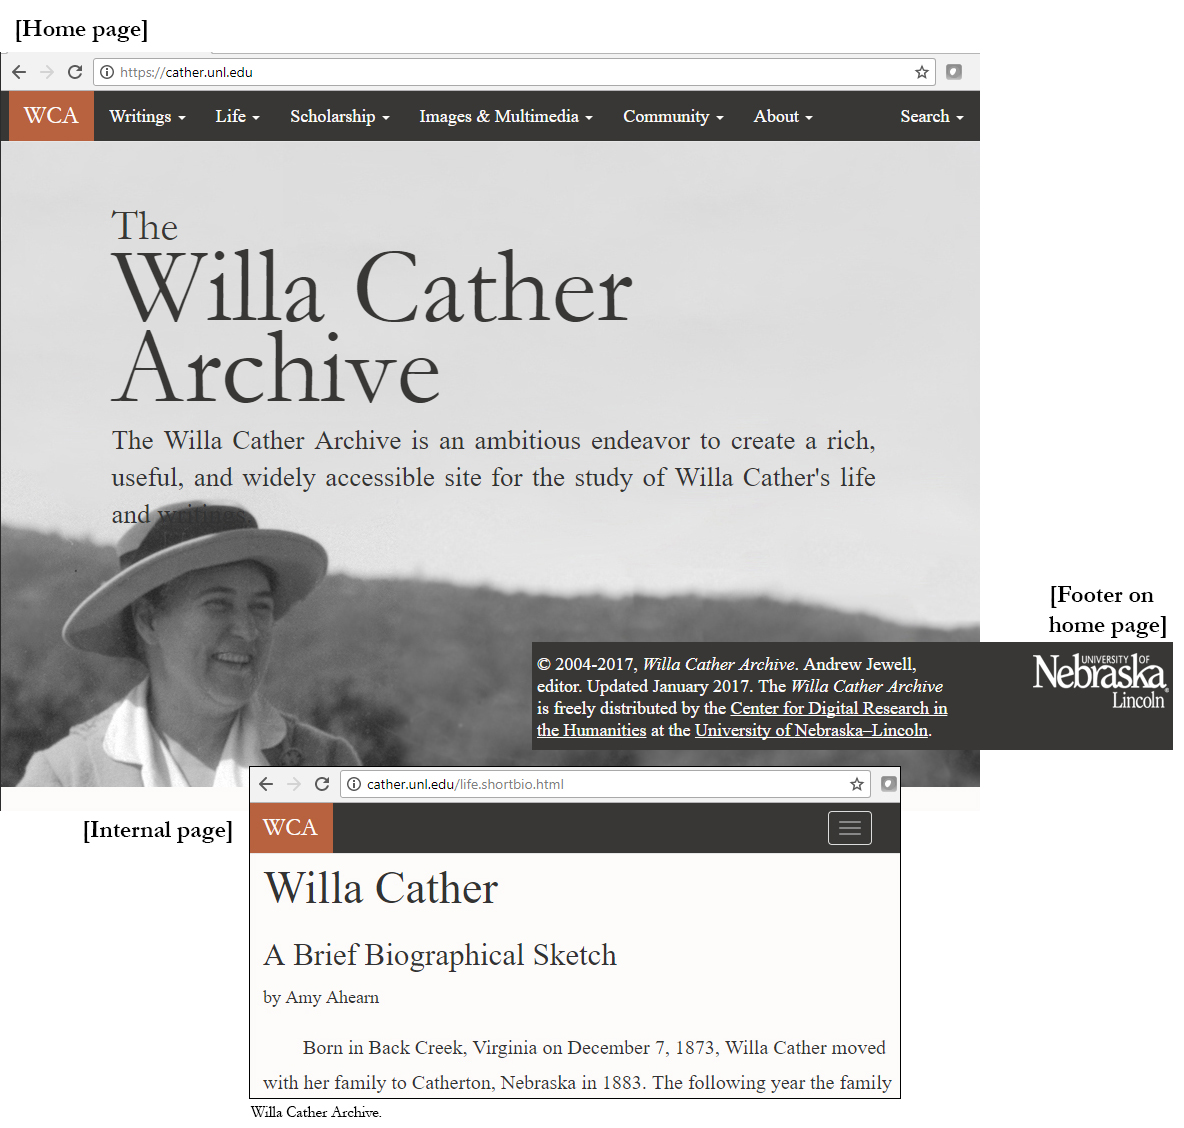 The text on the home page is as follows. The Willa Cather Archive. The Willa Cather Archive is an ambitious endeavor to create a rich, useful, and widely accessible site for the study of Willa Cather’s life and writings. The text in the footer on the home page reads as follows. Copyright 2004-2017, Willa Cather Archive, Andrew Jewell, editor. Updated January 2017. The Willa Cather Archive is freely distributed by the Center for Digital Research in the Humanities at the University of Nebraska-Lincoln. The text on the internal page is as follows. Willa Cather. A brief biographical sketch by Amy Ahearn. Born in Back Creek, Virginia on December 7, 1873, Willa Cather [and so on].